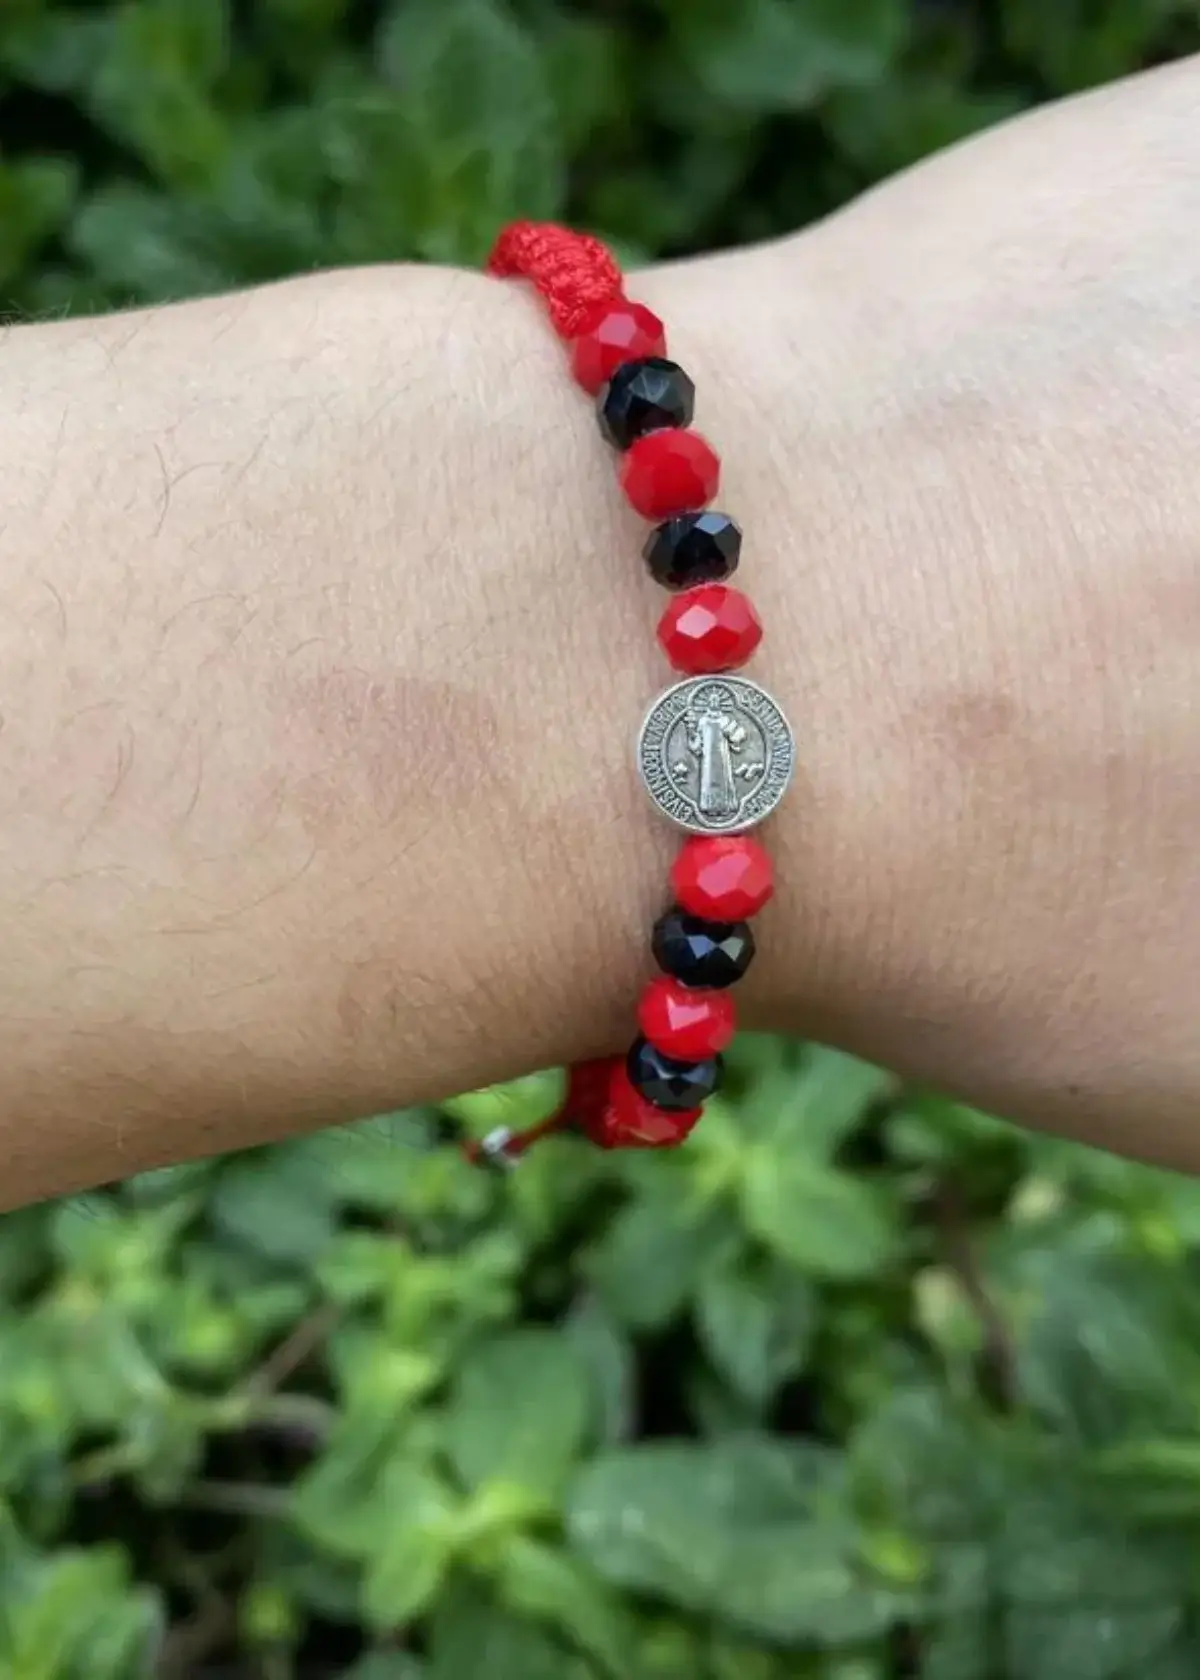 Can I customize my Red and Black bracelet?